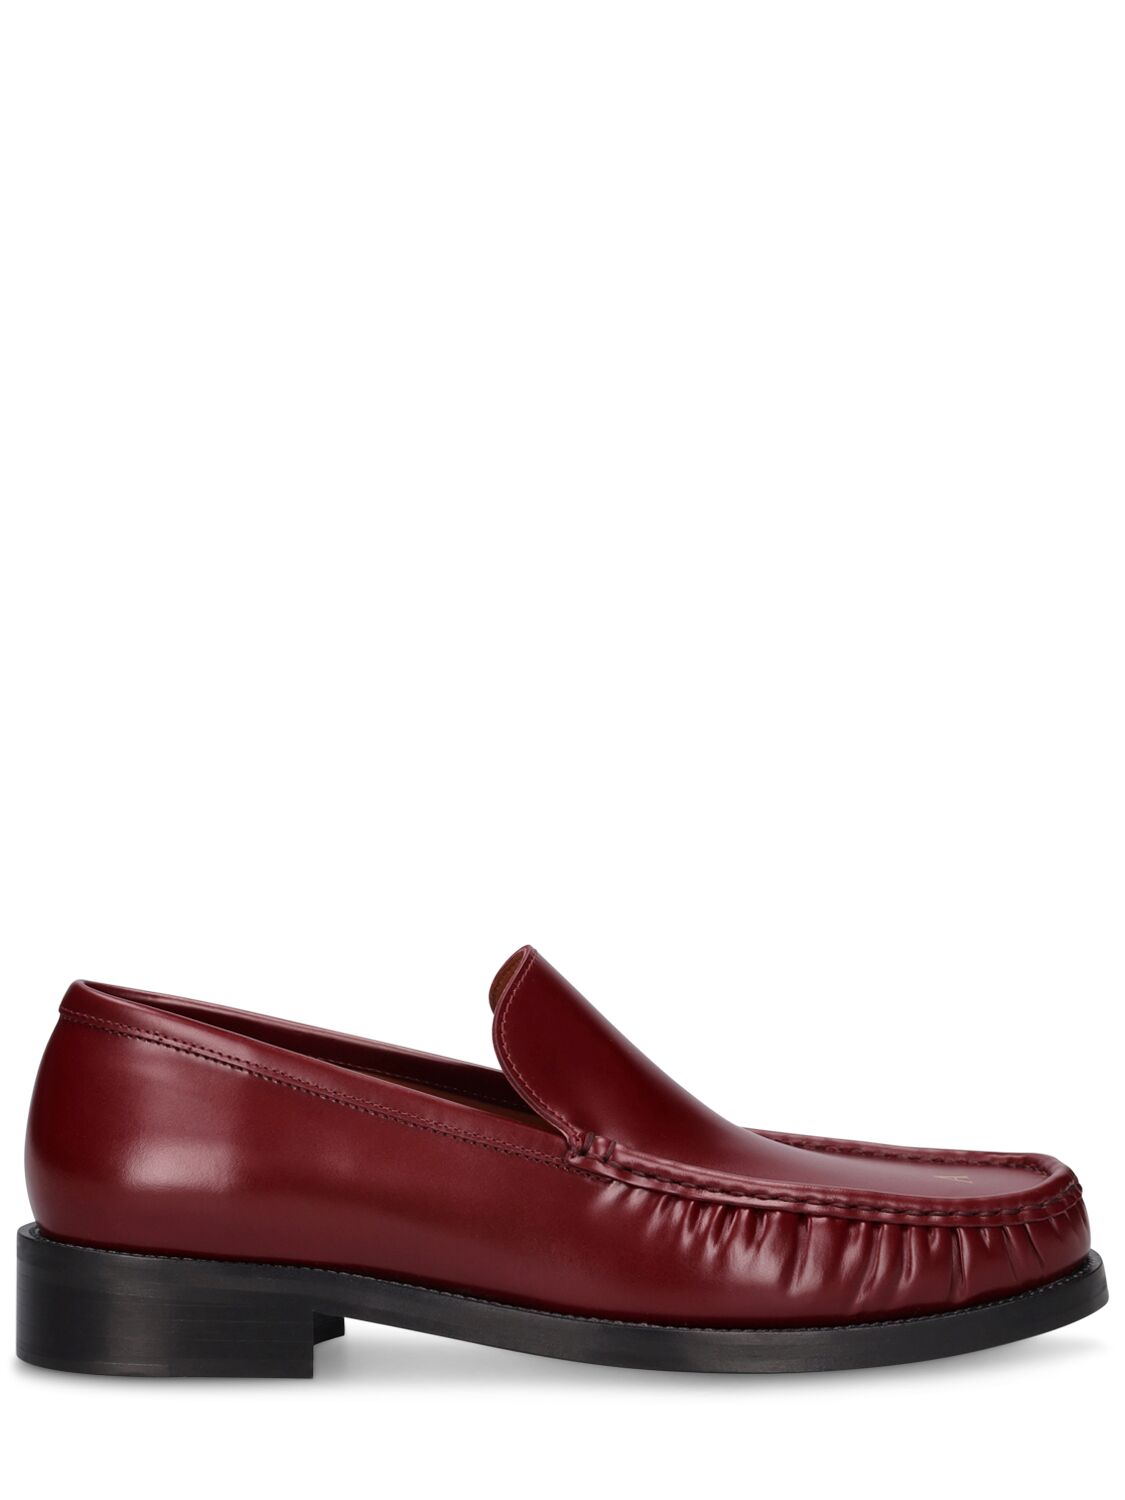 Acne Studios Boafer Sport Leather Loafers In Burgundy